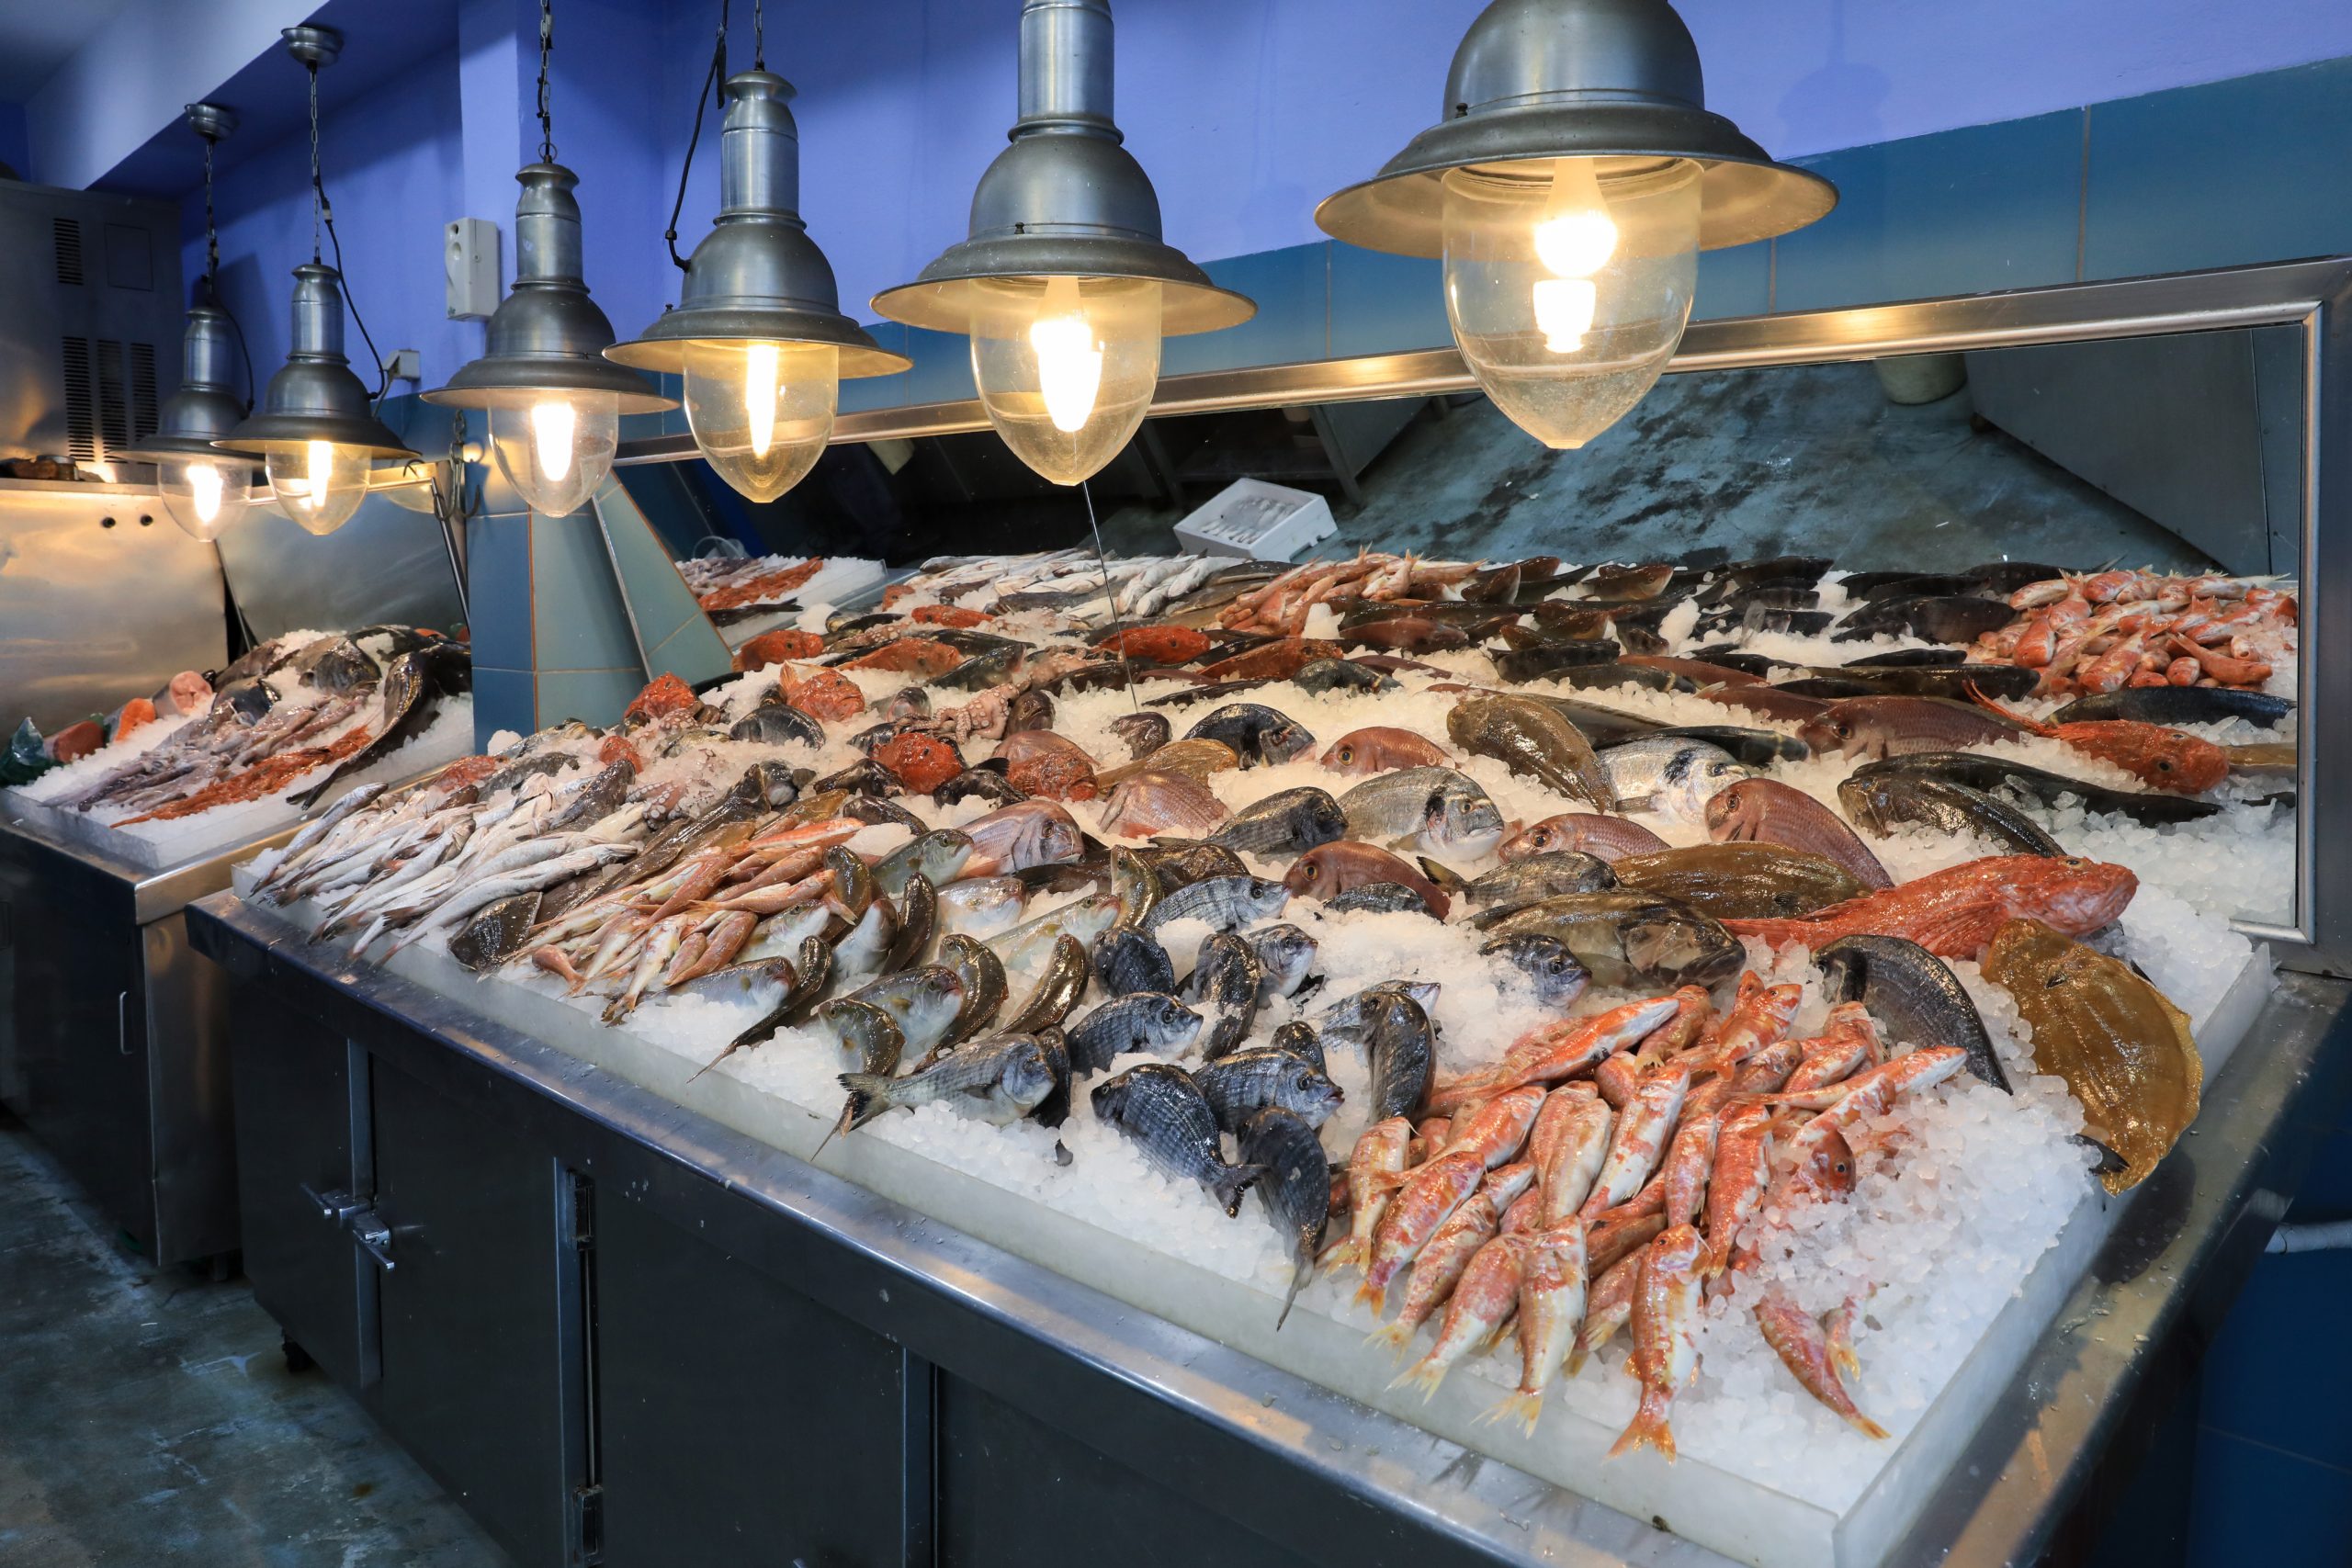 Display of frozen seafood over ice